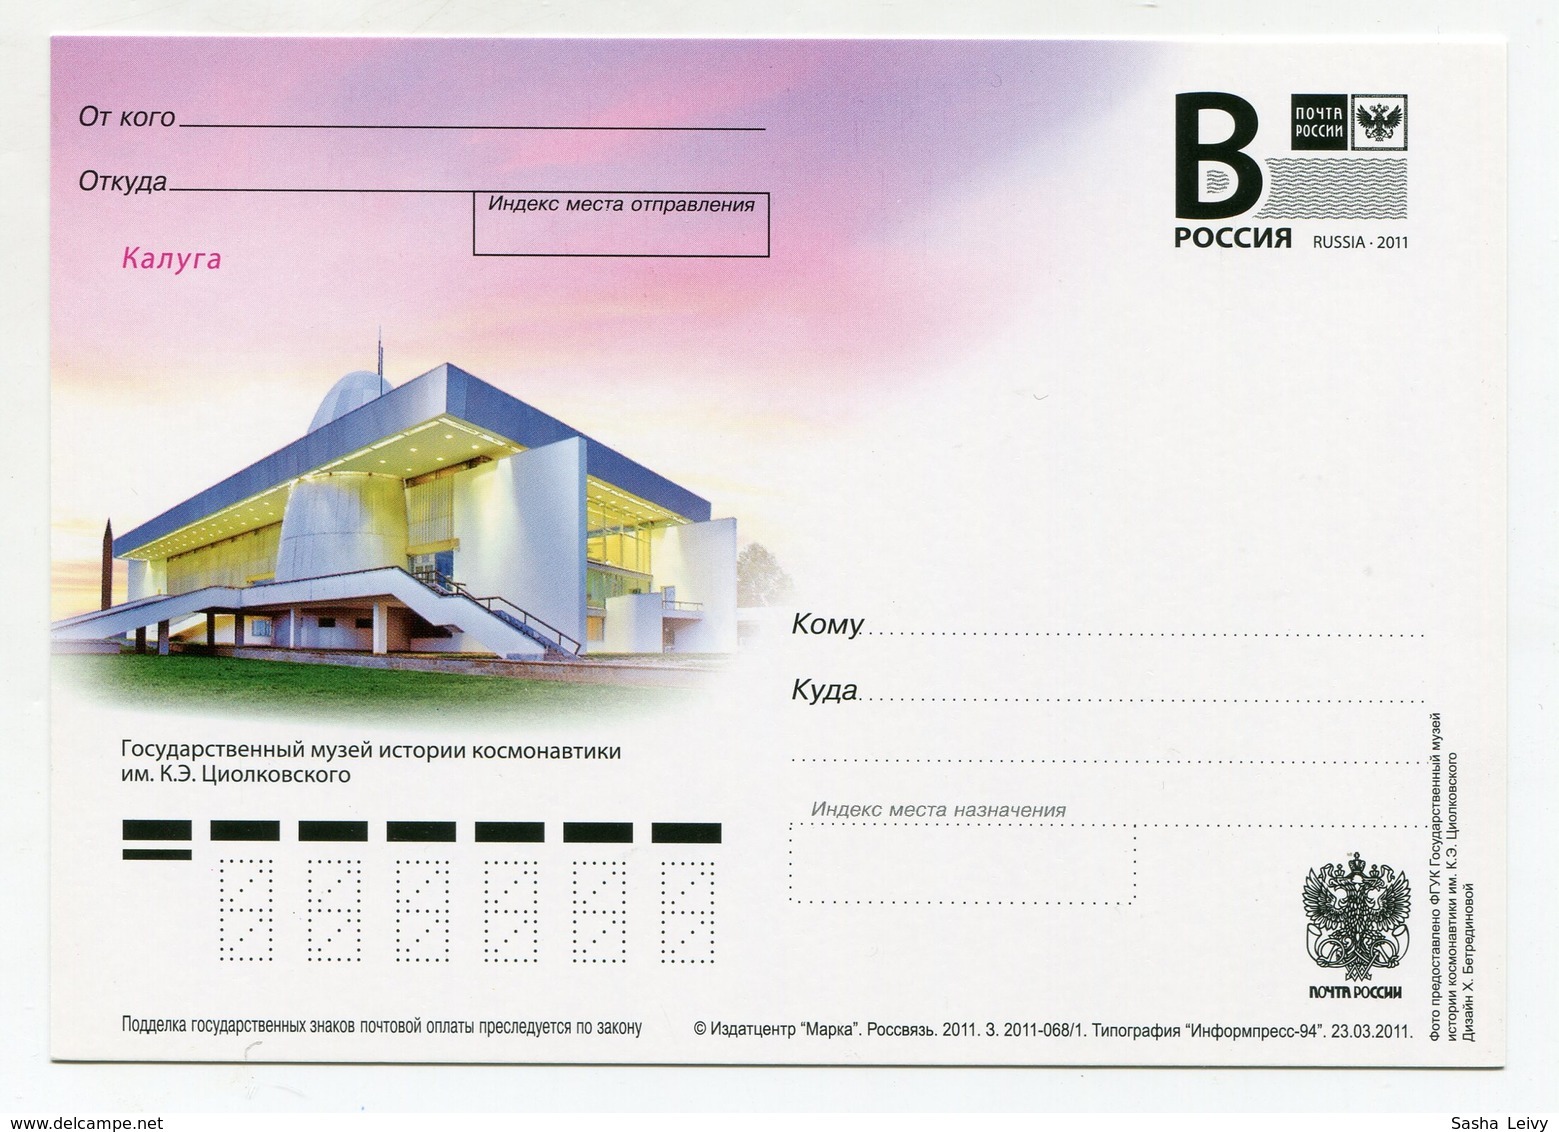 2011 RUSSIA POSTCARD "B" STATE MUSEUM OF COSMONAUTICS NAMED AFTER K.TSIOLKOVSKY KALUGA - Russia & USSR